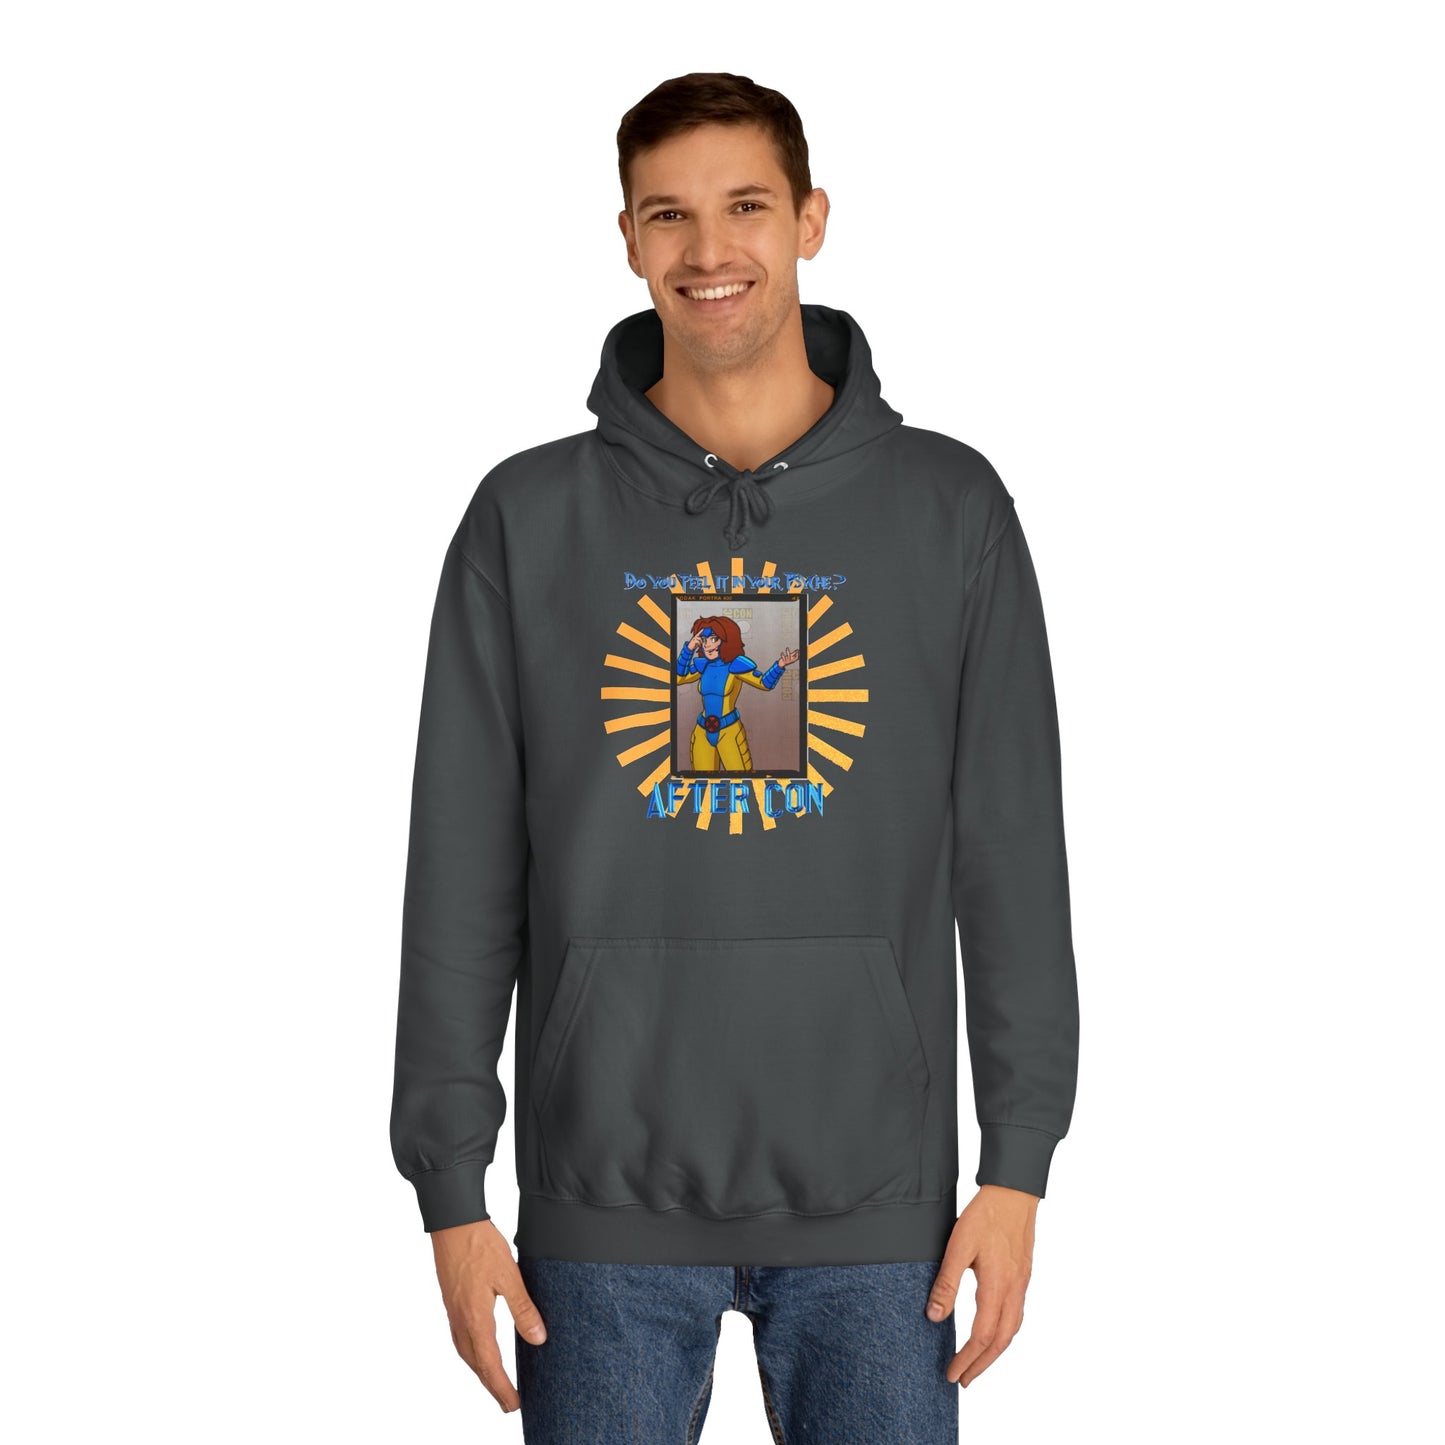 After-Con "Feel it in your Psyche" Unisex College Hoodie